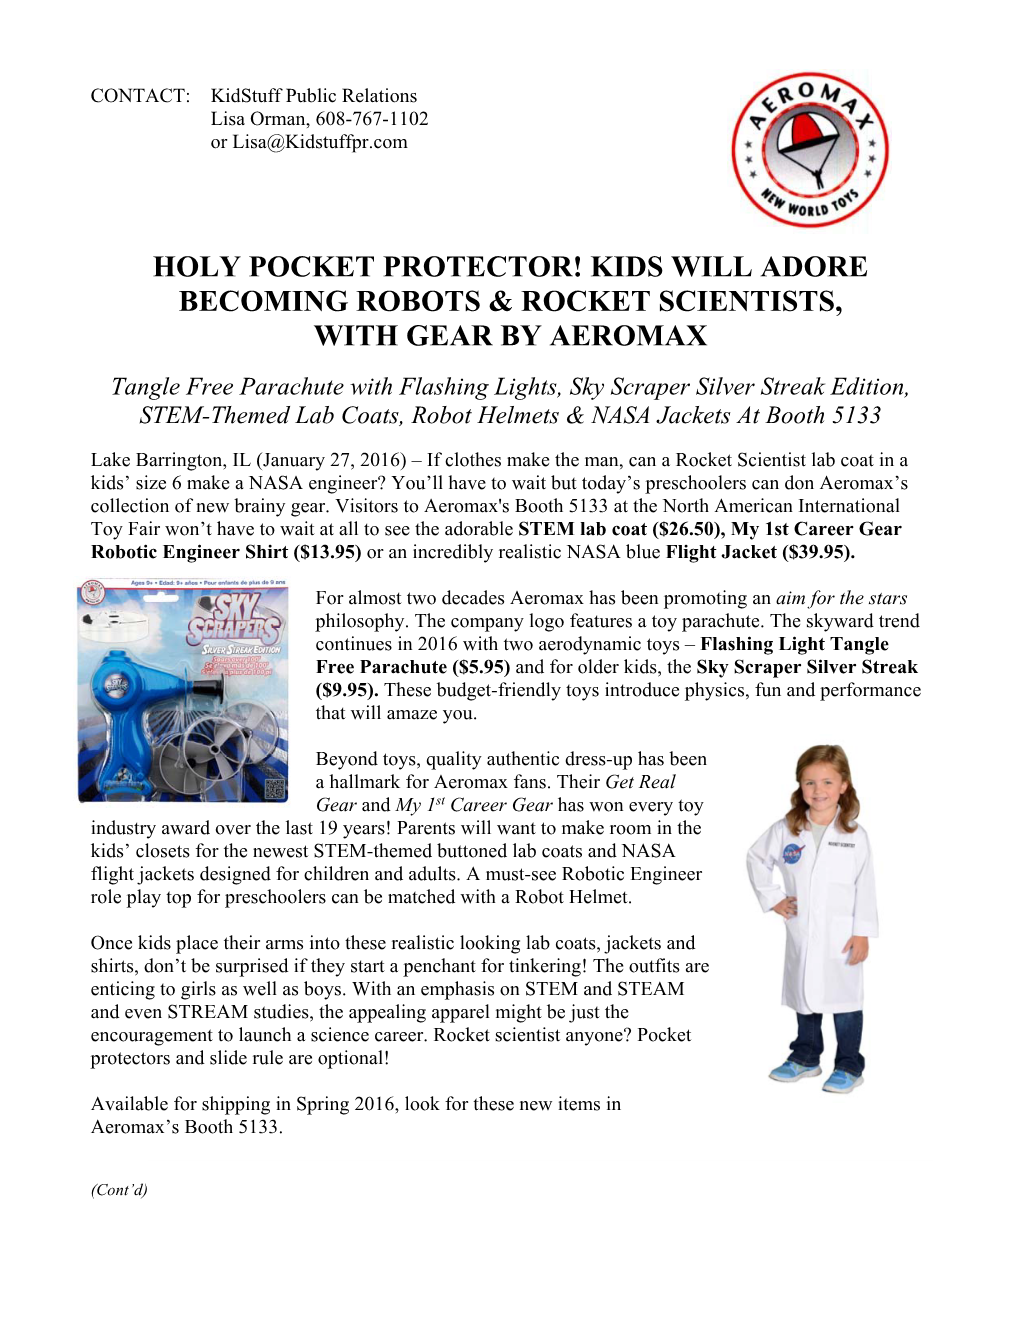 Holy Pocket Protector! Kids Will Adore Becoming Robots & Rocket Scientists, with Gear by Aeromax